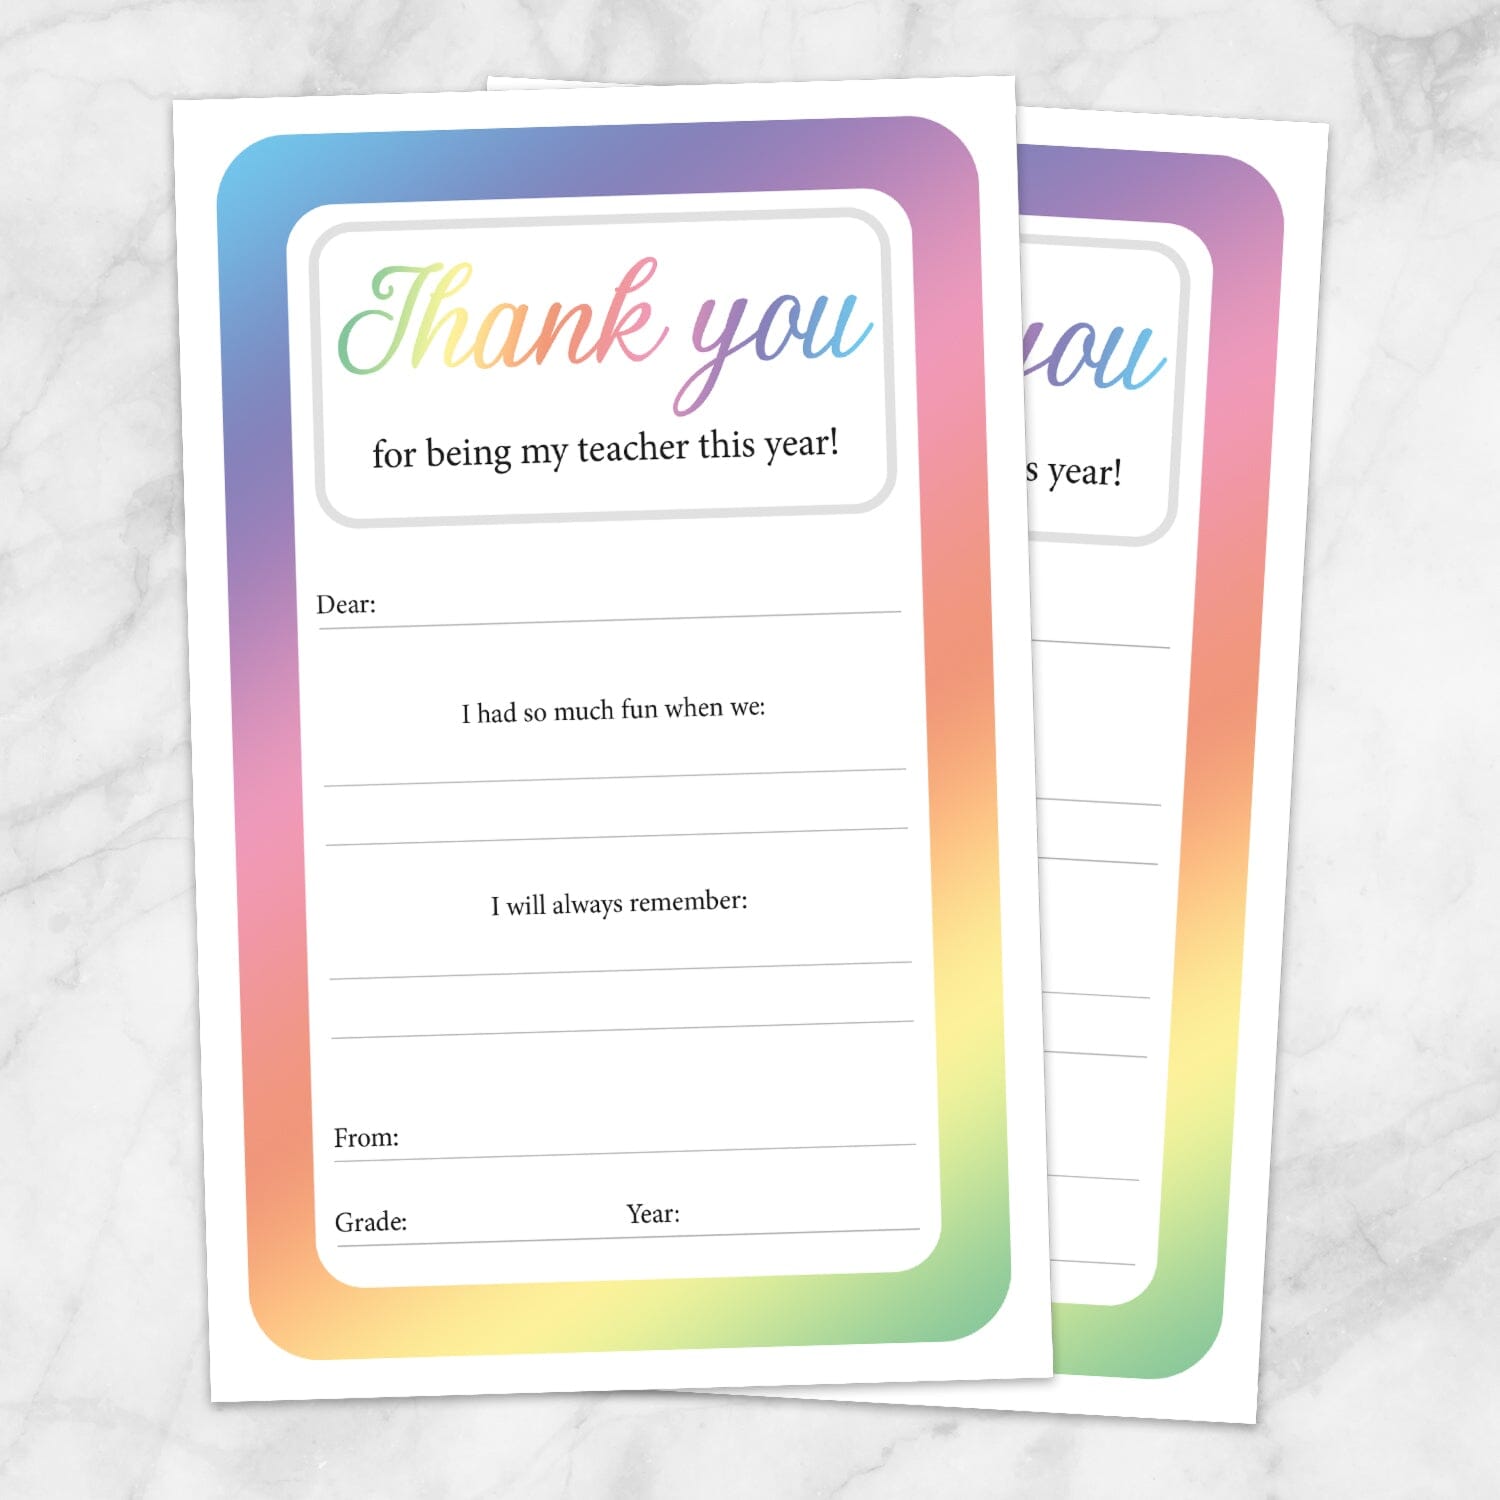 Printable Colorful Teacher Thank You Notes at Printable Planning. Example of 2 thank you notes.